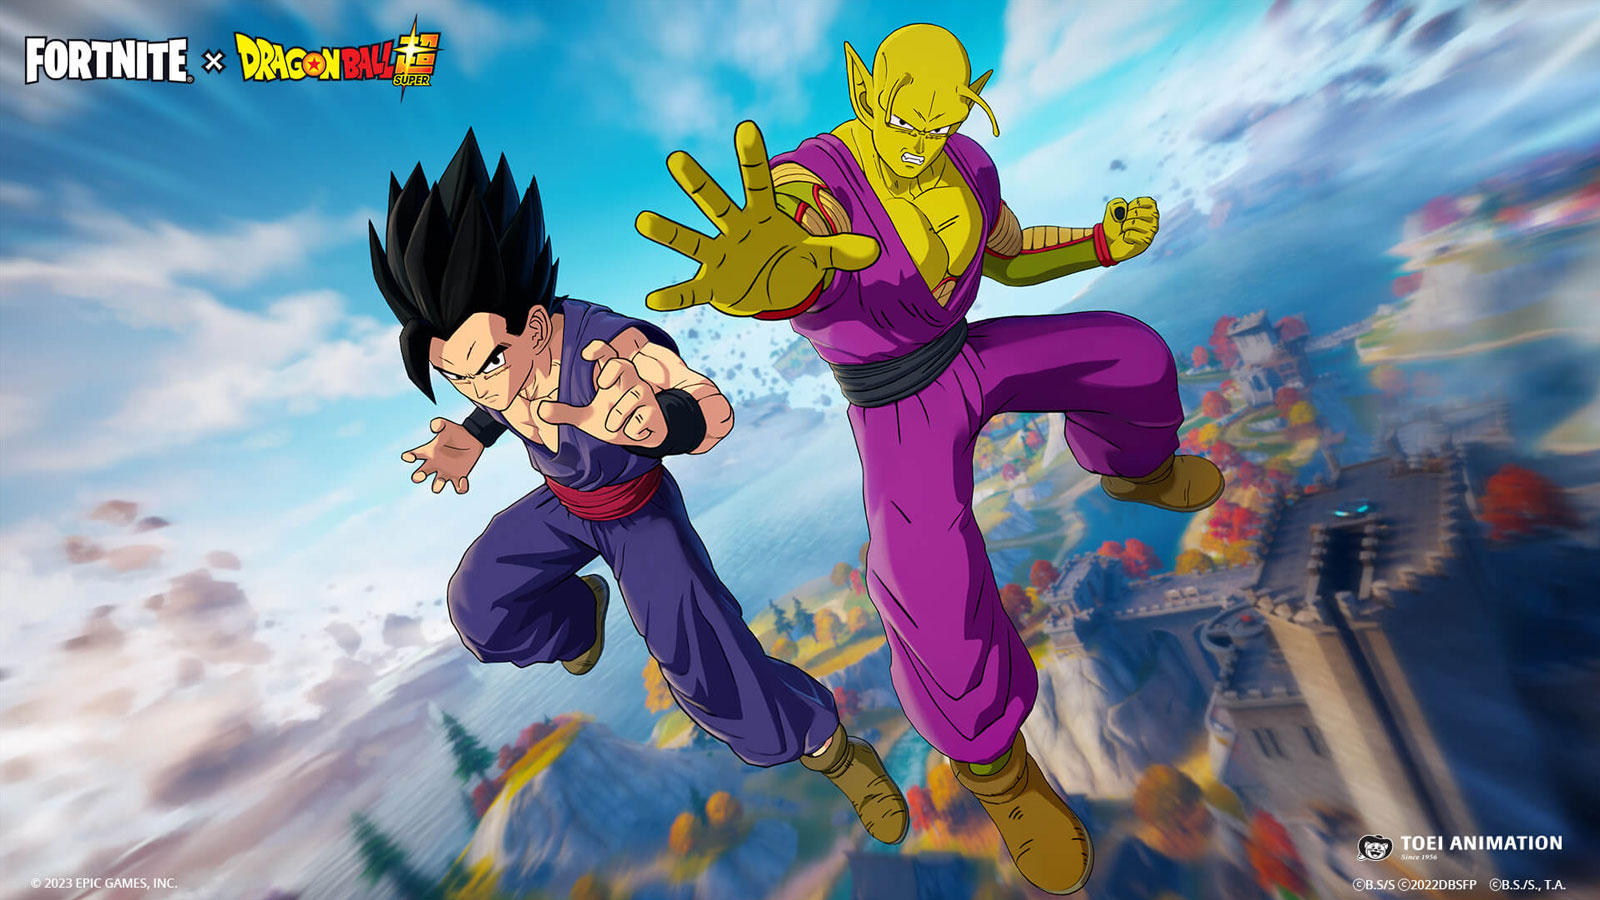 2ND DRAGON BALL X FORTNITE COLLABOARATION BRINGS SON GOHAN AND PICCOLO FROM DRAGON BALL SUPER: SUPER HERO! *NEW POST*